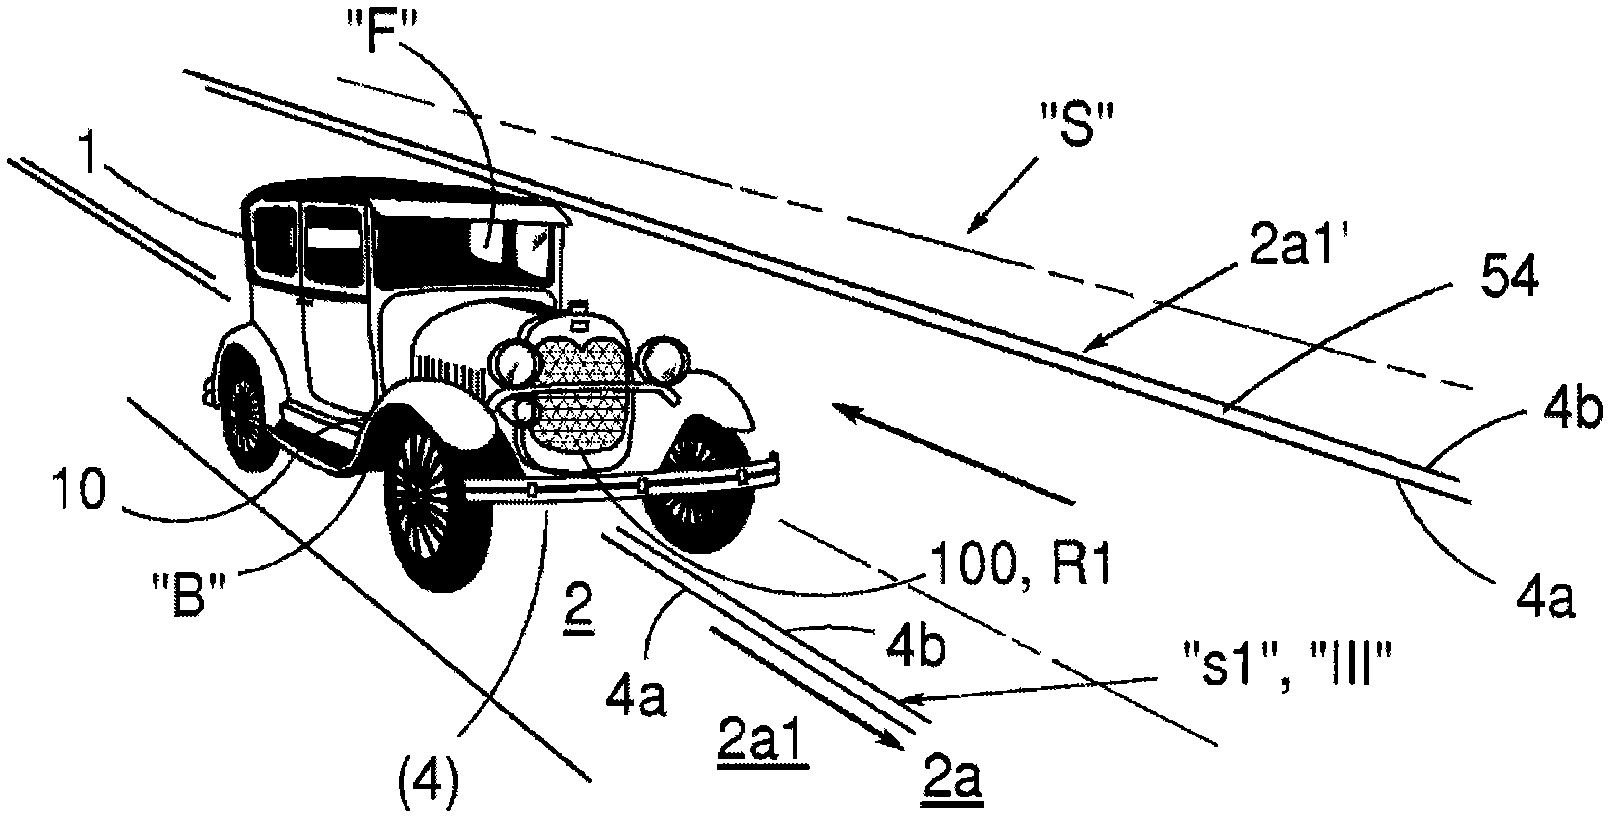 A system adapted for one or more vehicles, which may be driven forward electrically